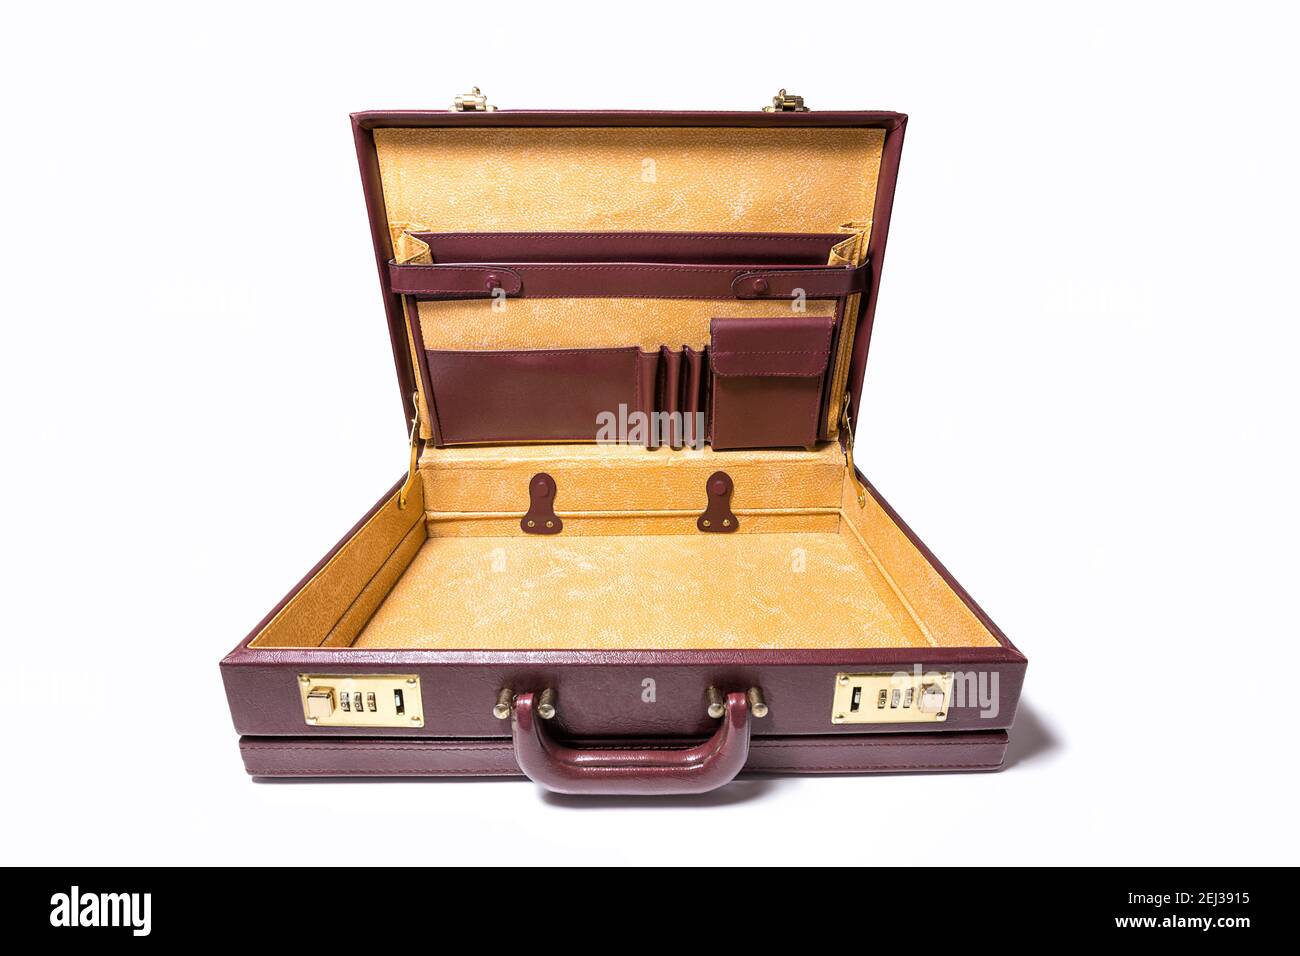 Open and empty 24 hour briefcase on white background Stock Photo